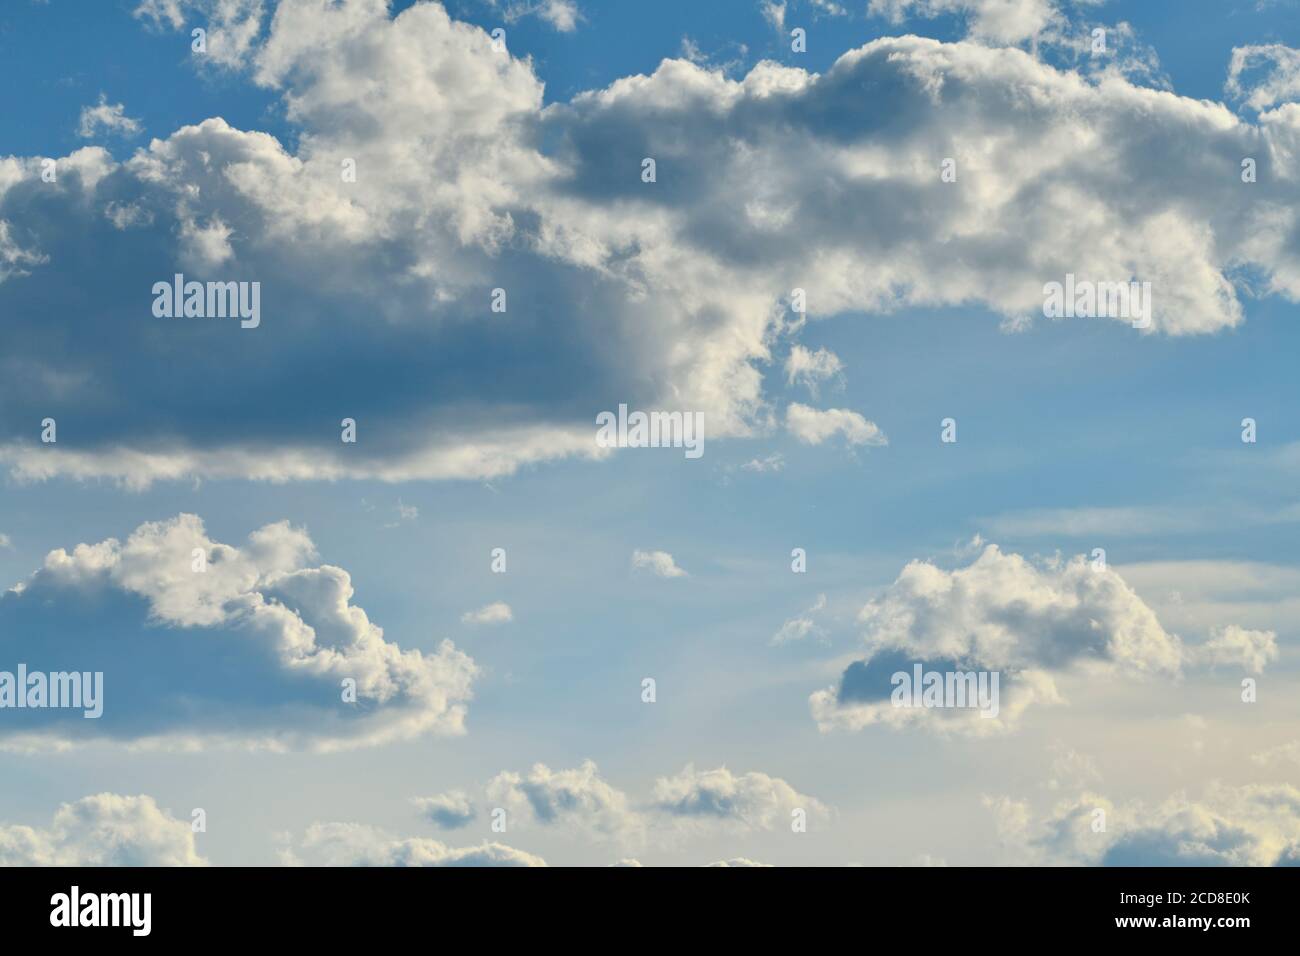 A horizontal image og a blue sky with white clouds in rural Alberta Canada Stock Photo